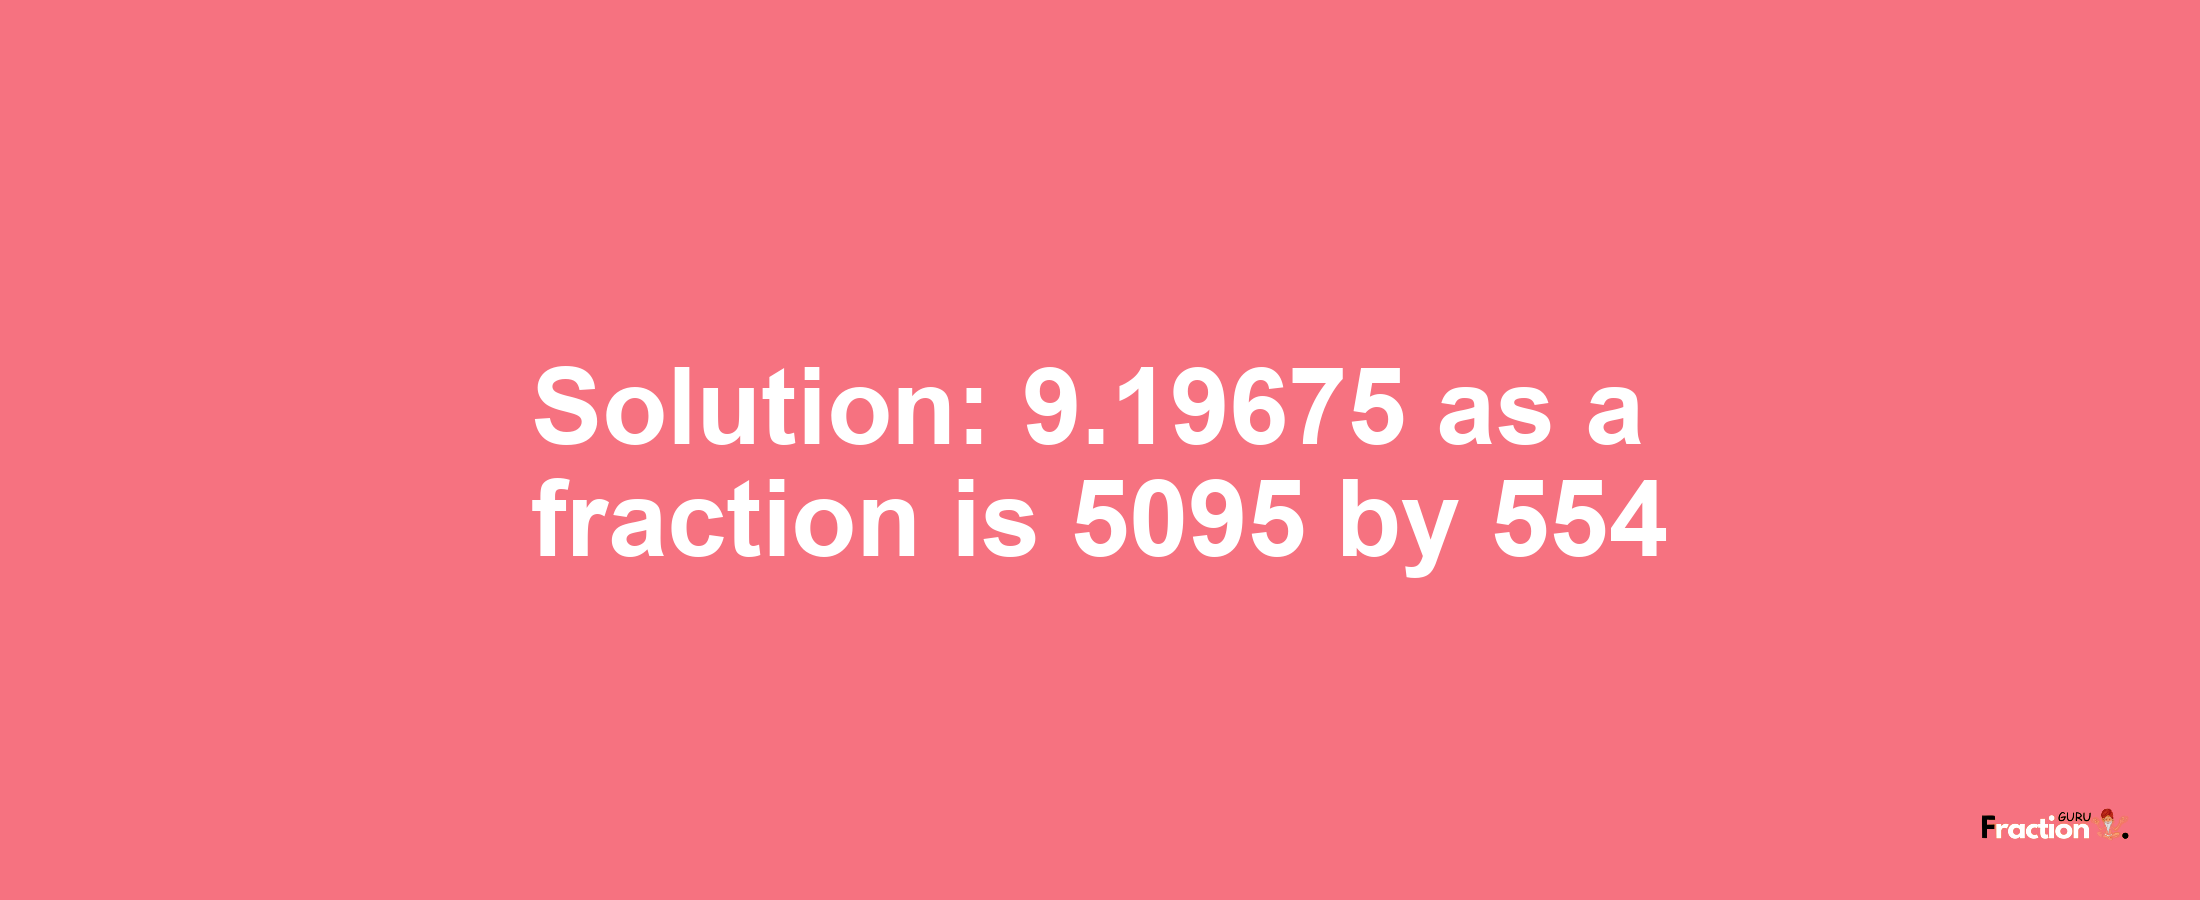 Solution:9.19675 as a fraction is 5095/554